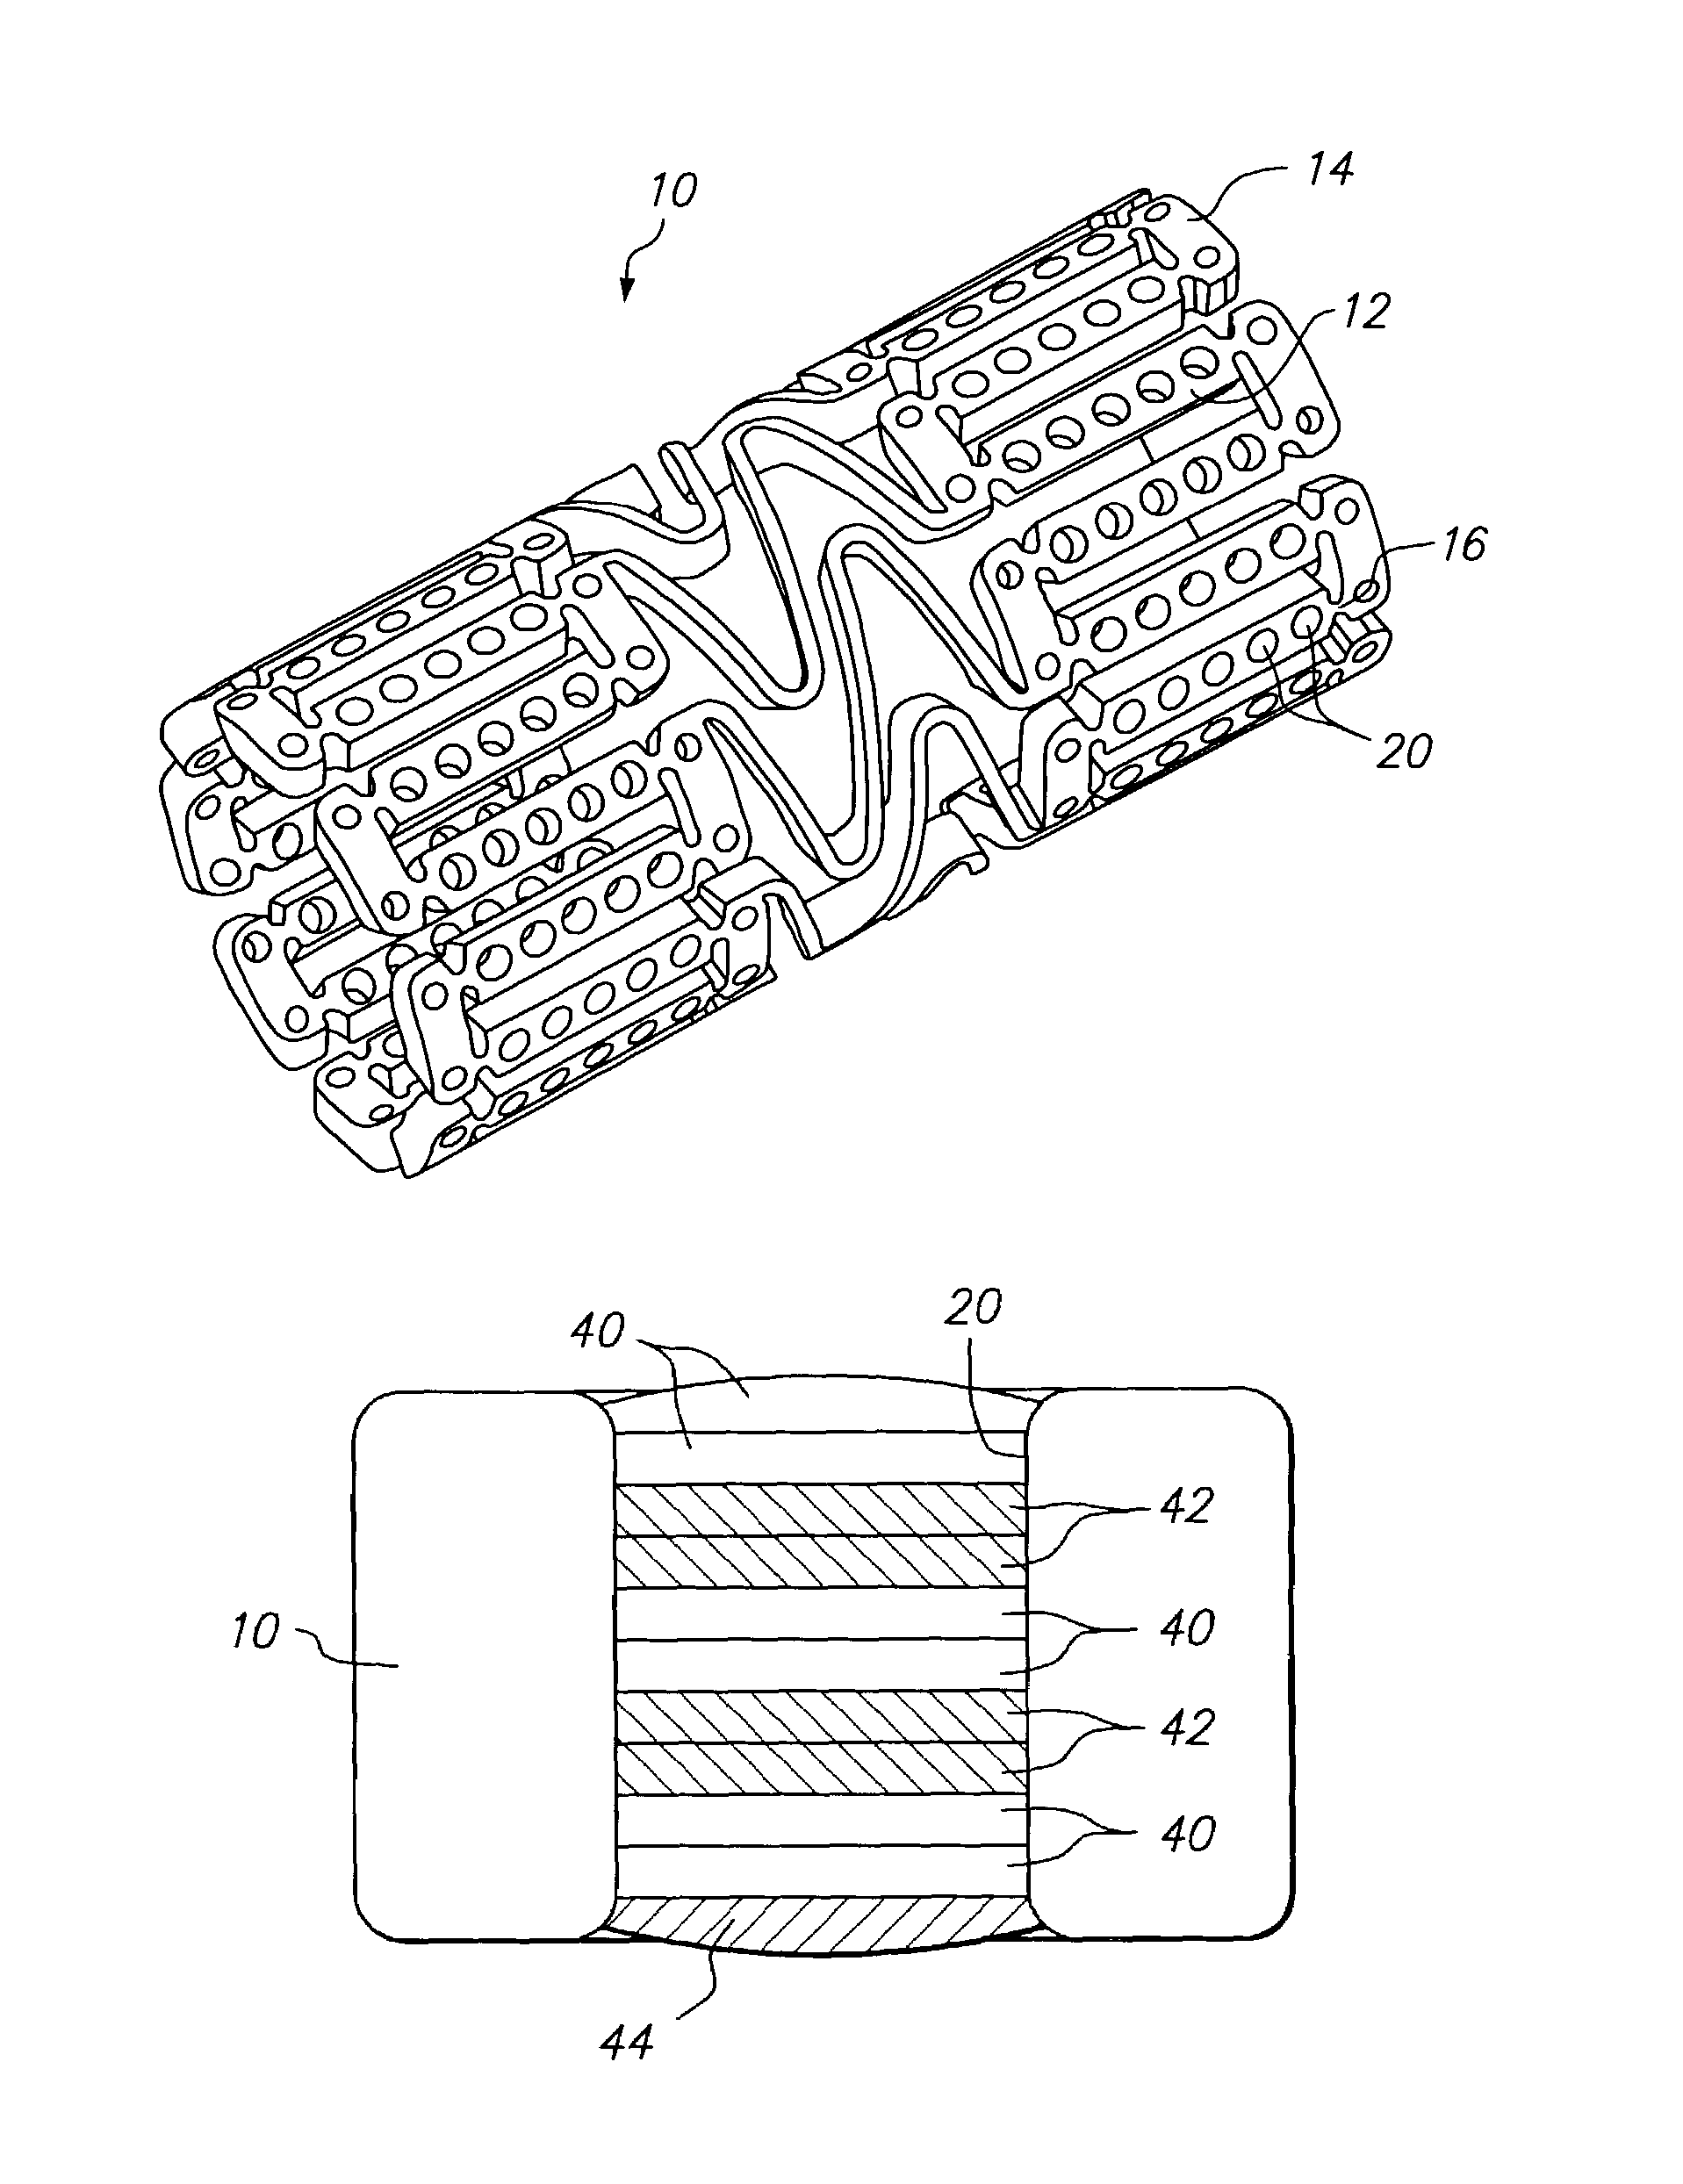 Implantable medical device with drug filled holes